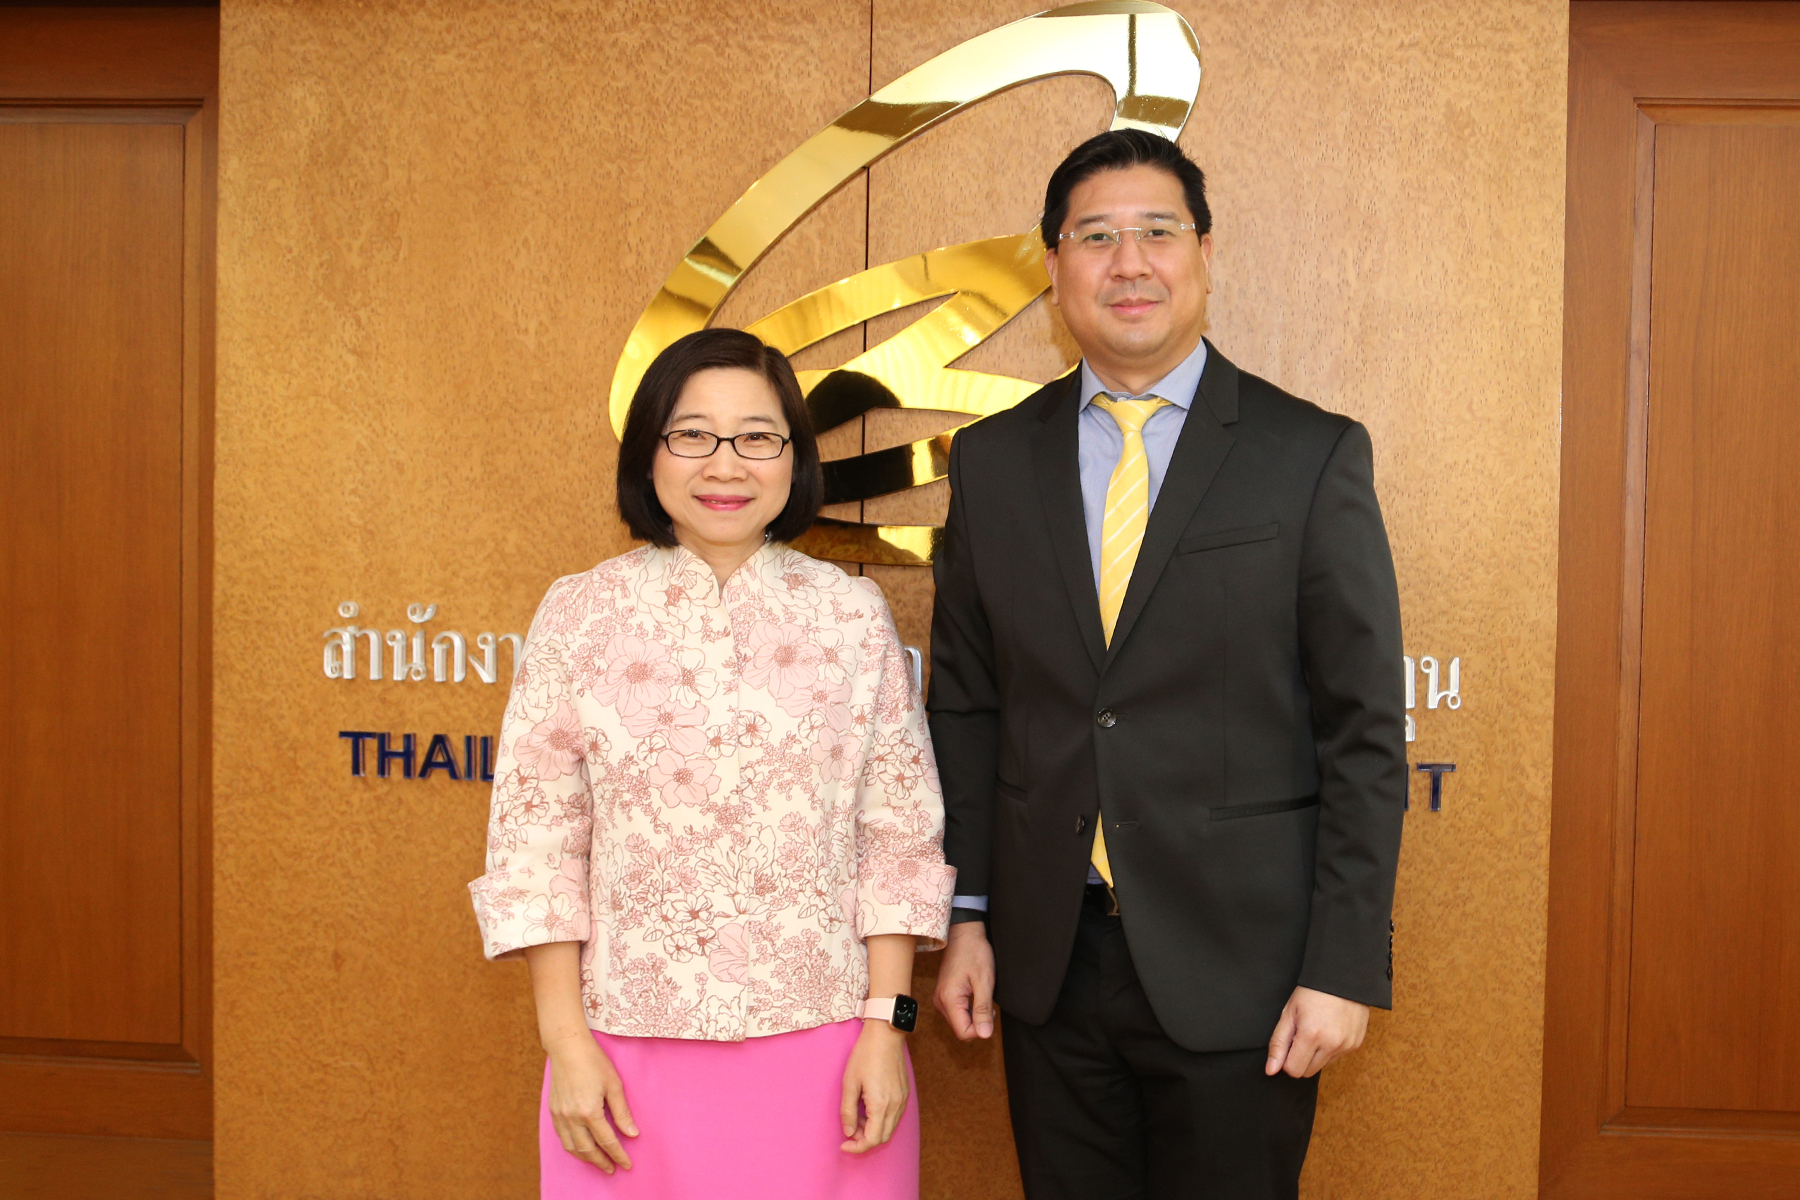 EXIM Thailand Visits Secretary General of the Board of Investment of Thailand to Extend New Year 2020 Greetings